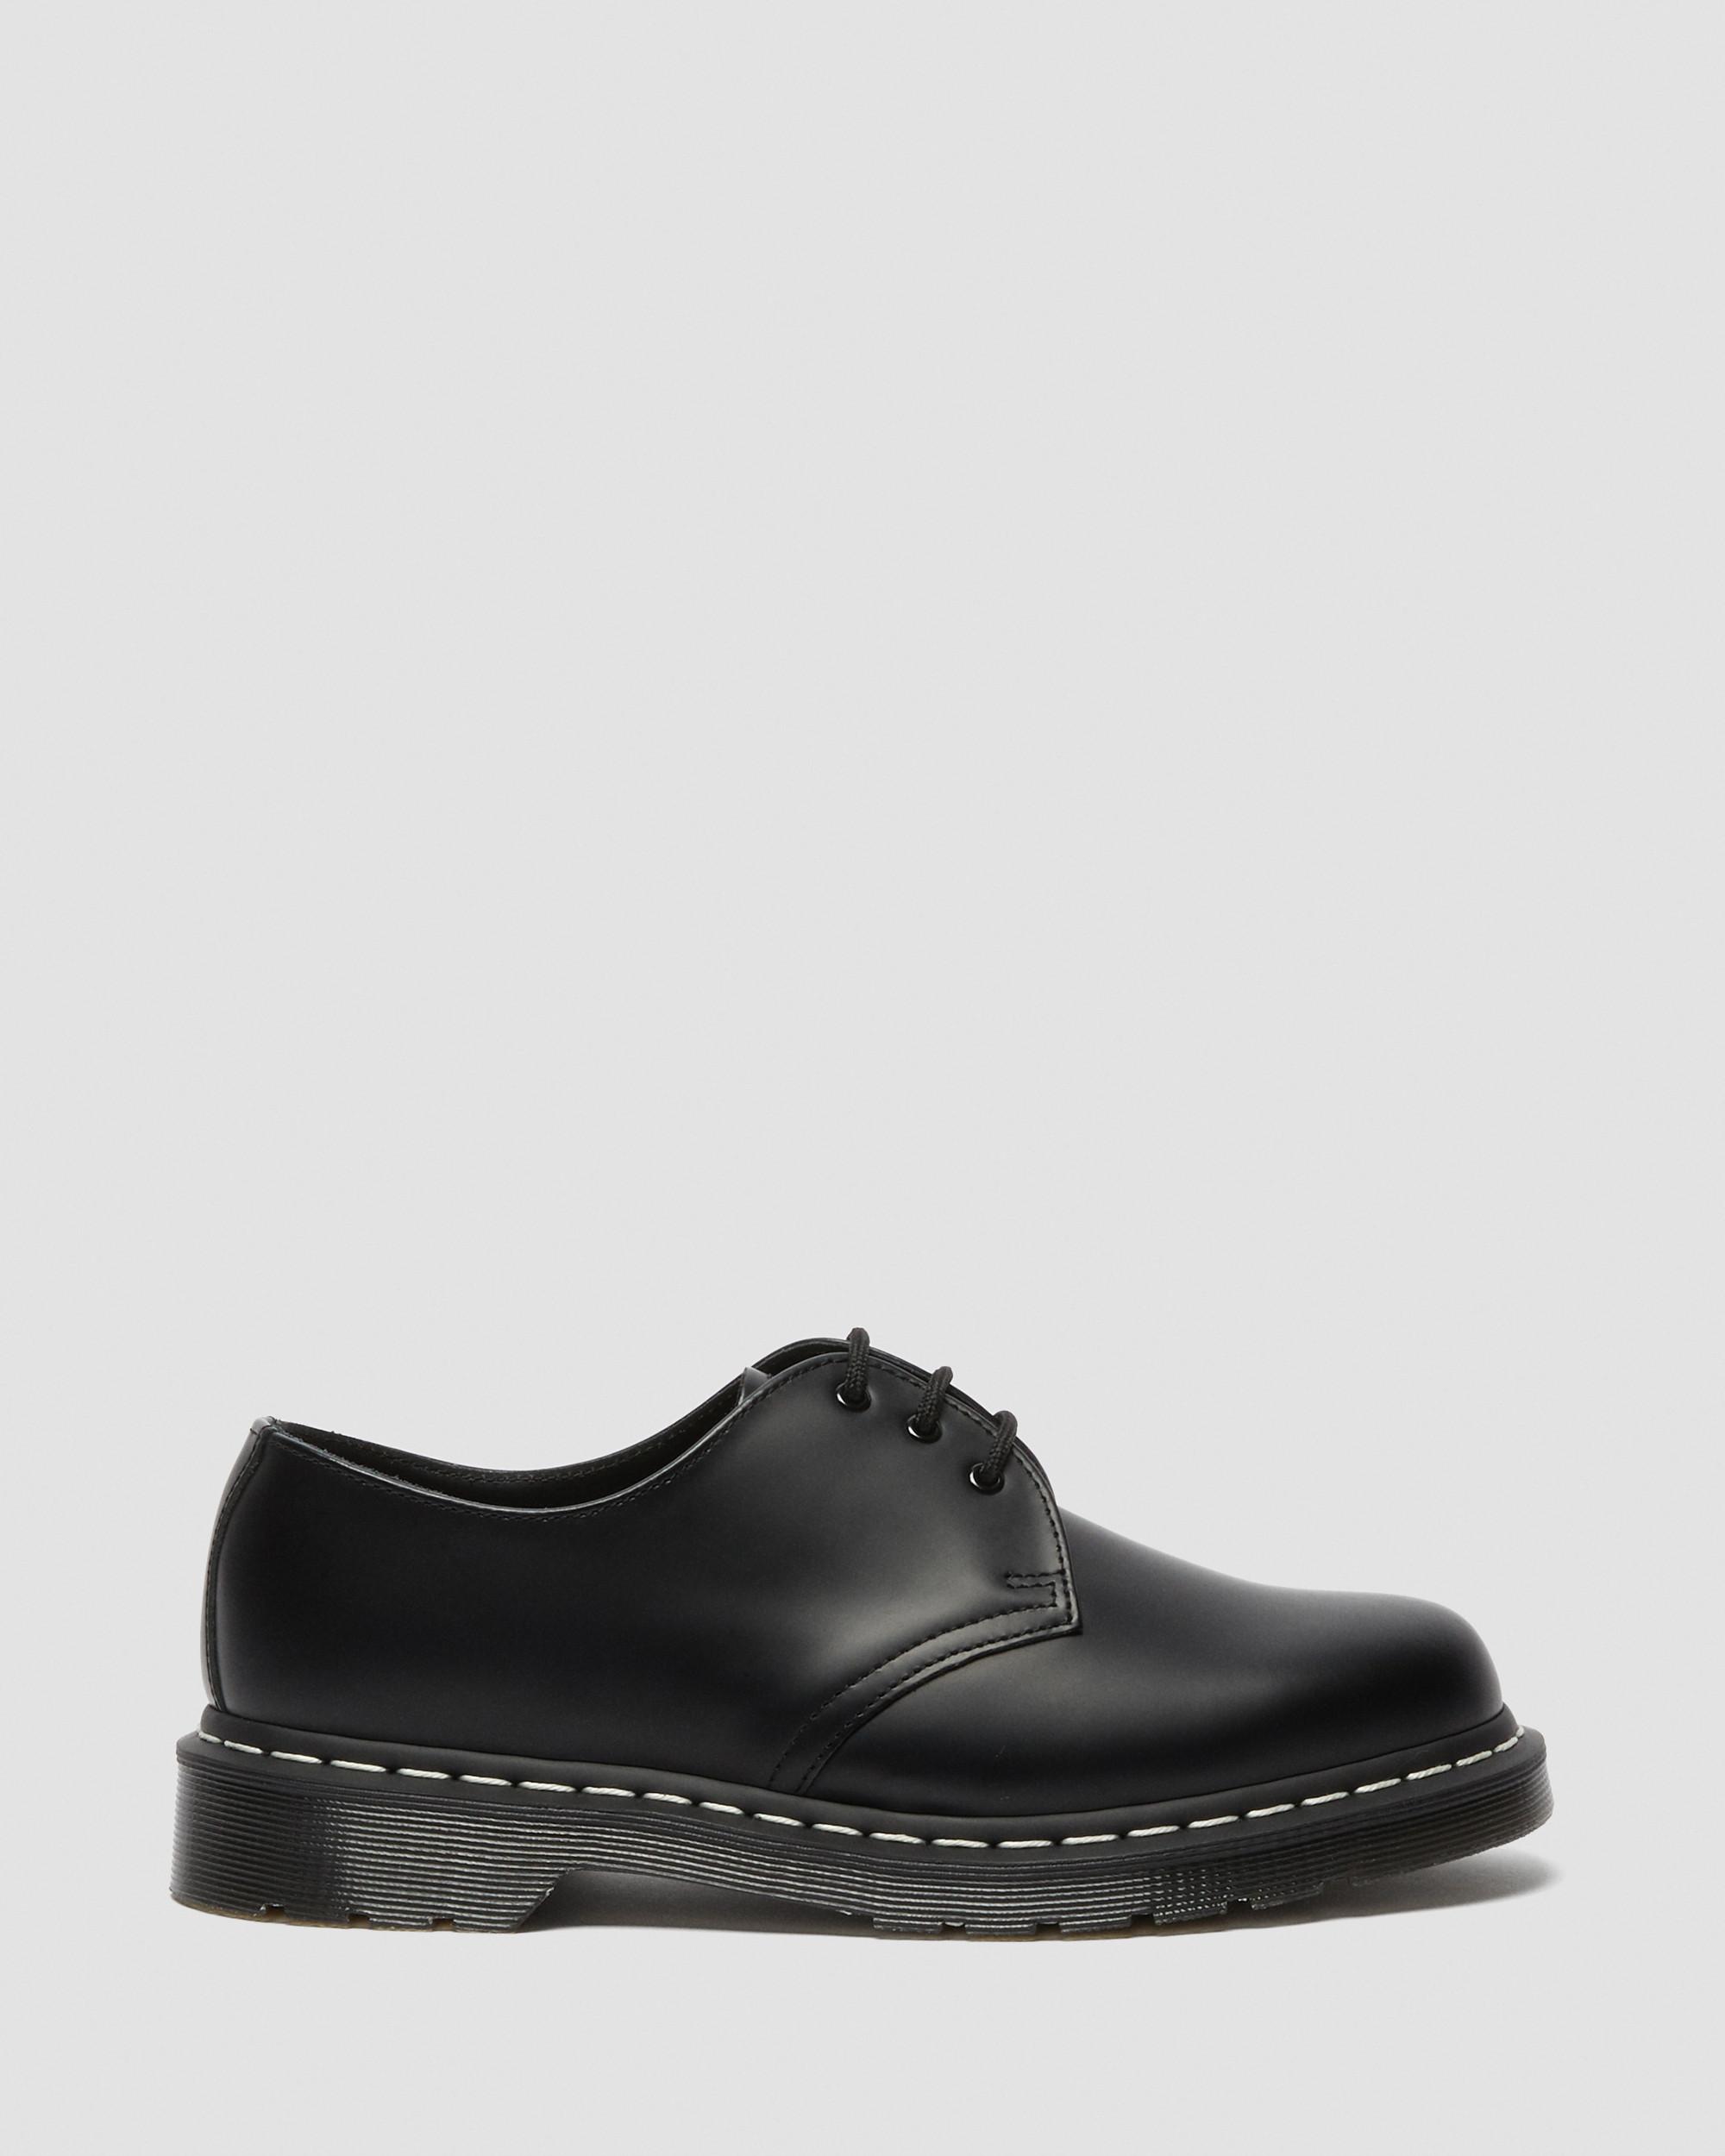 1461 Contrast Stitch Smooth Leather Oxford Shoes | Dr. Martens